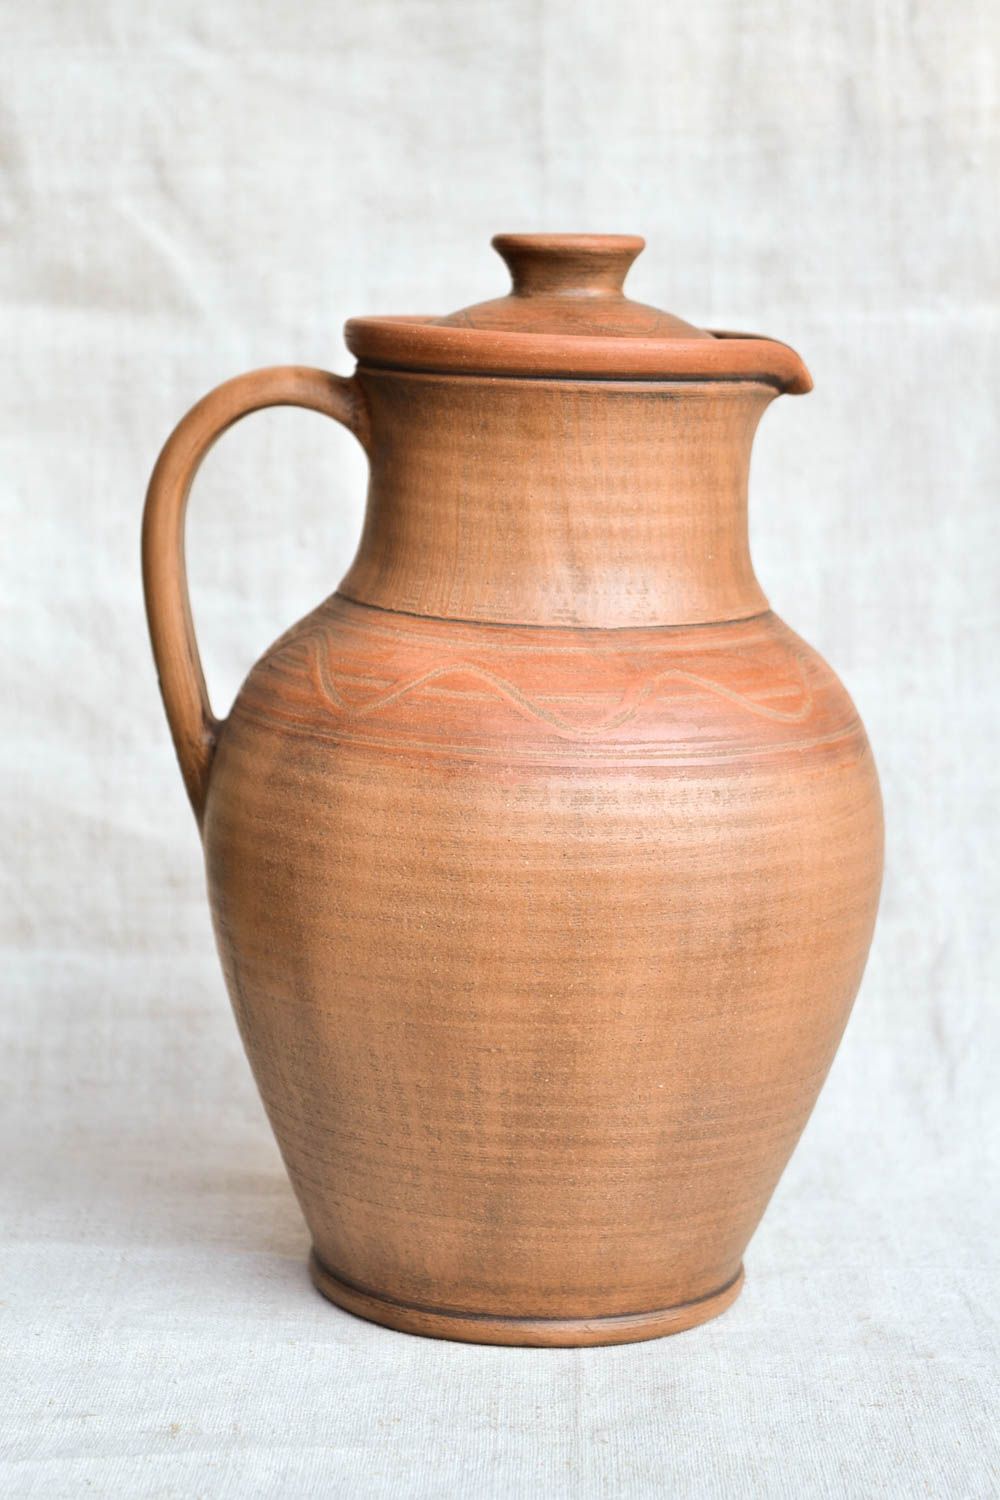 90 oz ceramic wine pitcher with handle and lid in terracotta color 2,4 lb photo 3